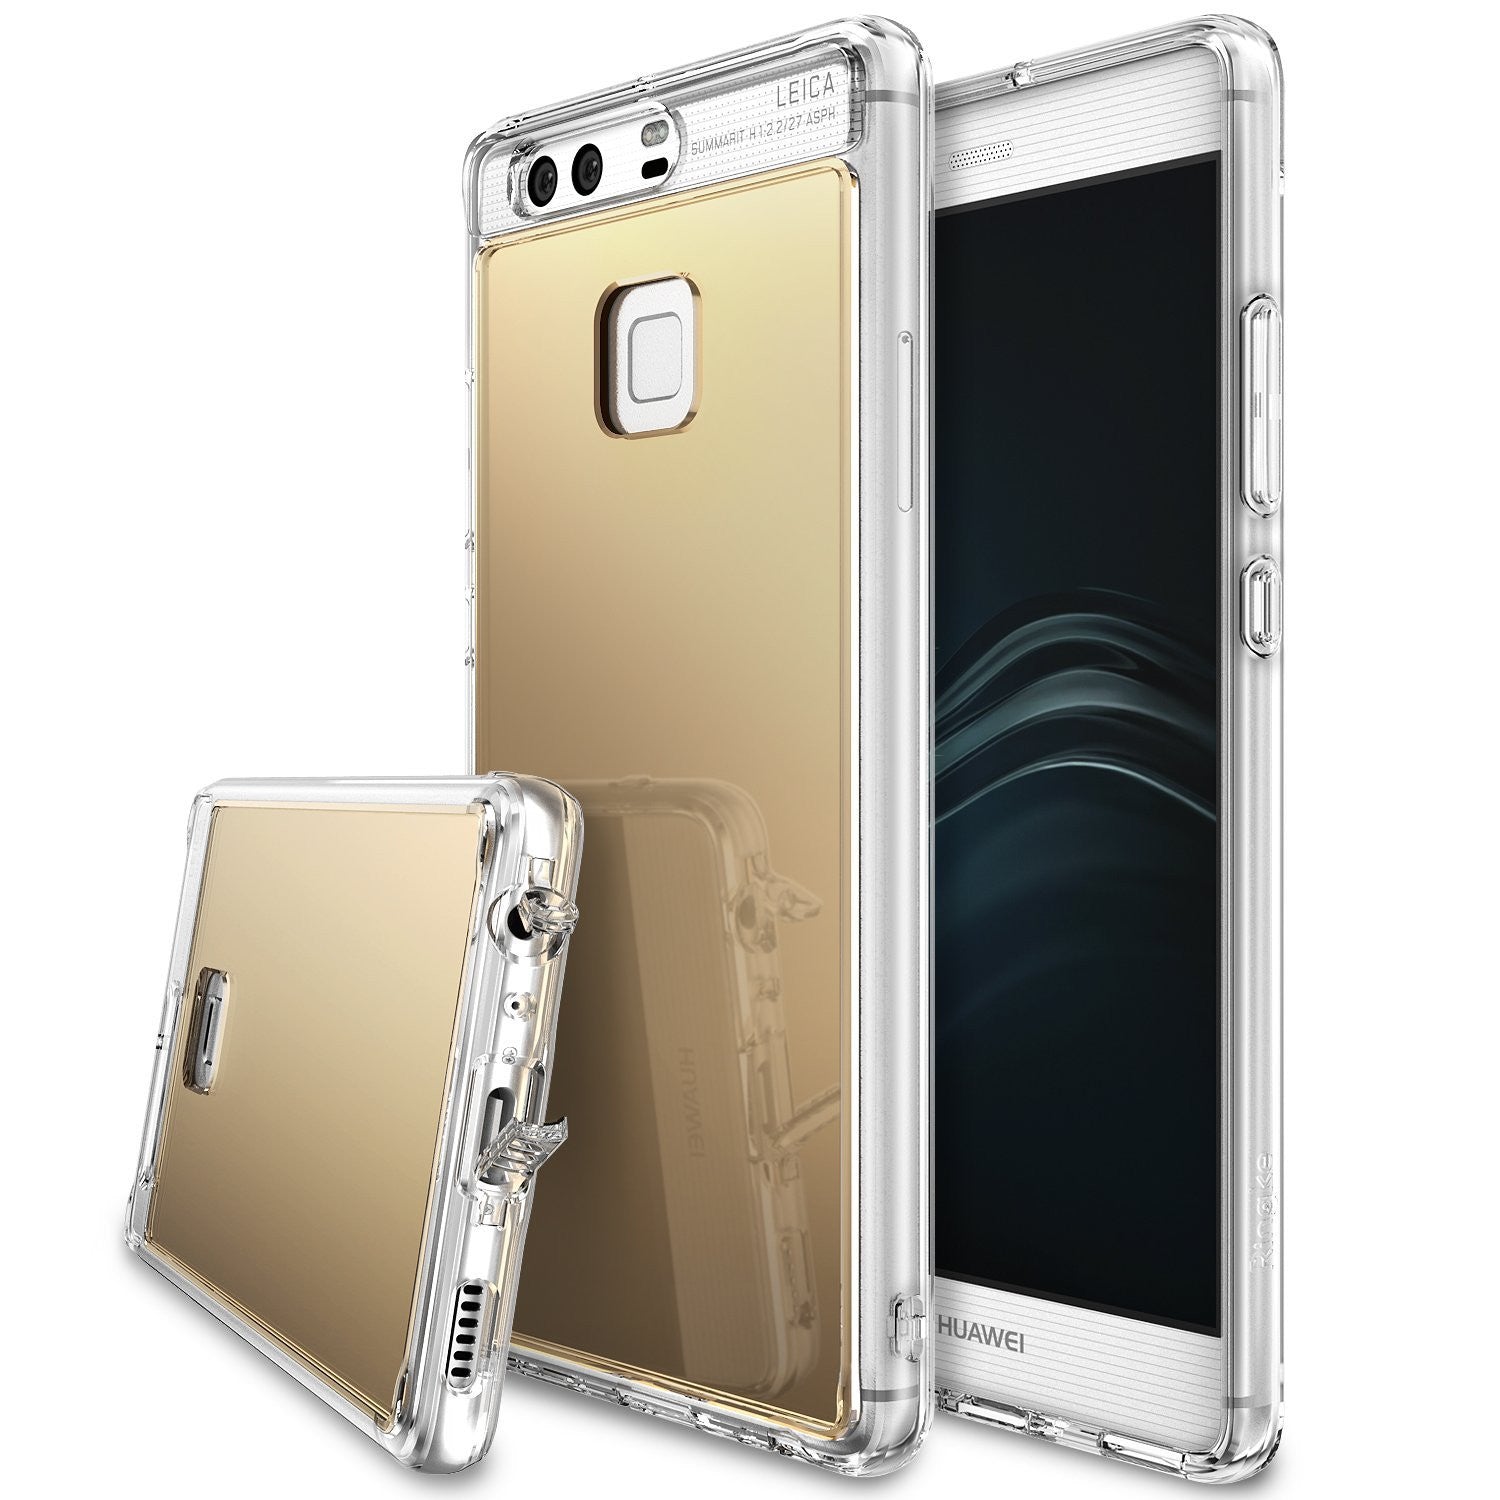 fusion case mirror case huawei mate 8 bright reflection radiant luxury mirror case rose gold